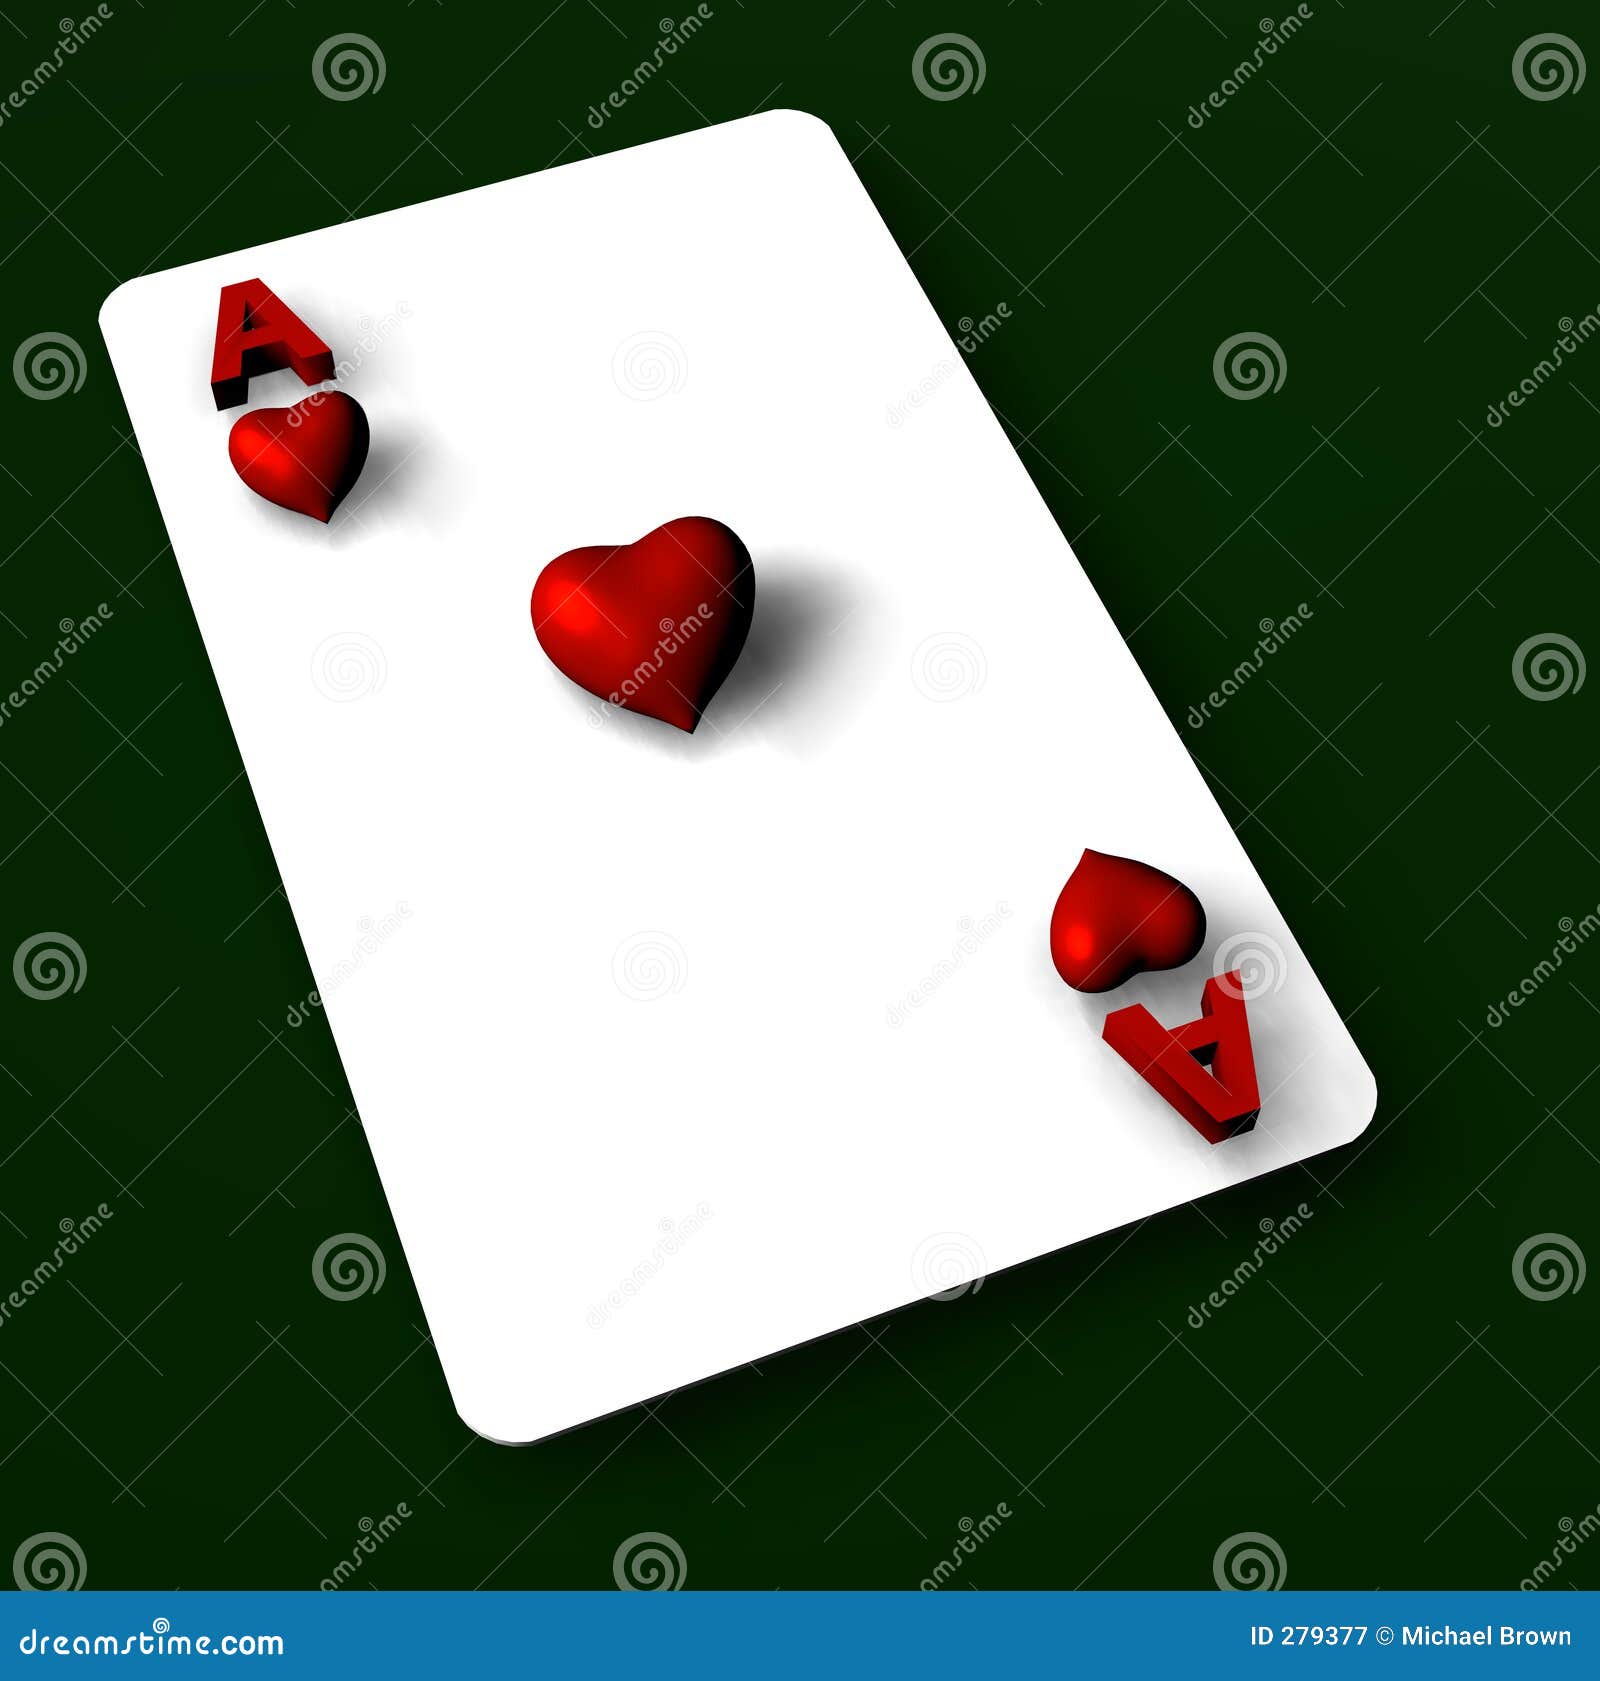 http://thumbs.dreamstime.com/z/ace-hearts-279377.jpg